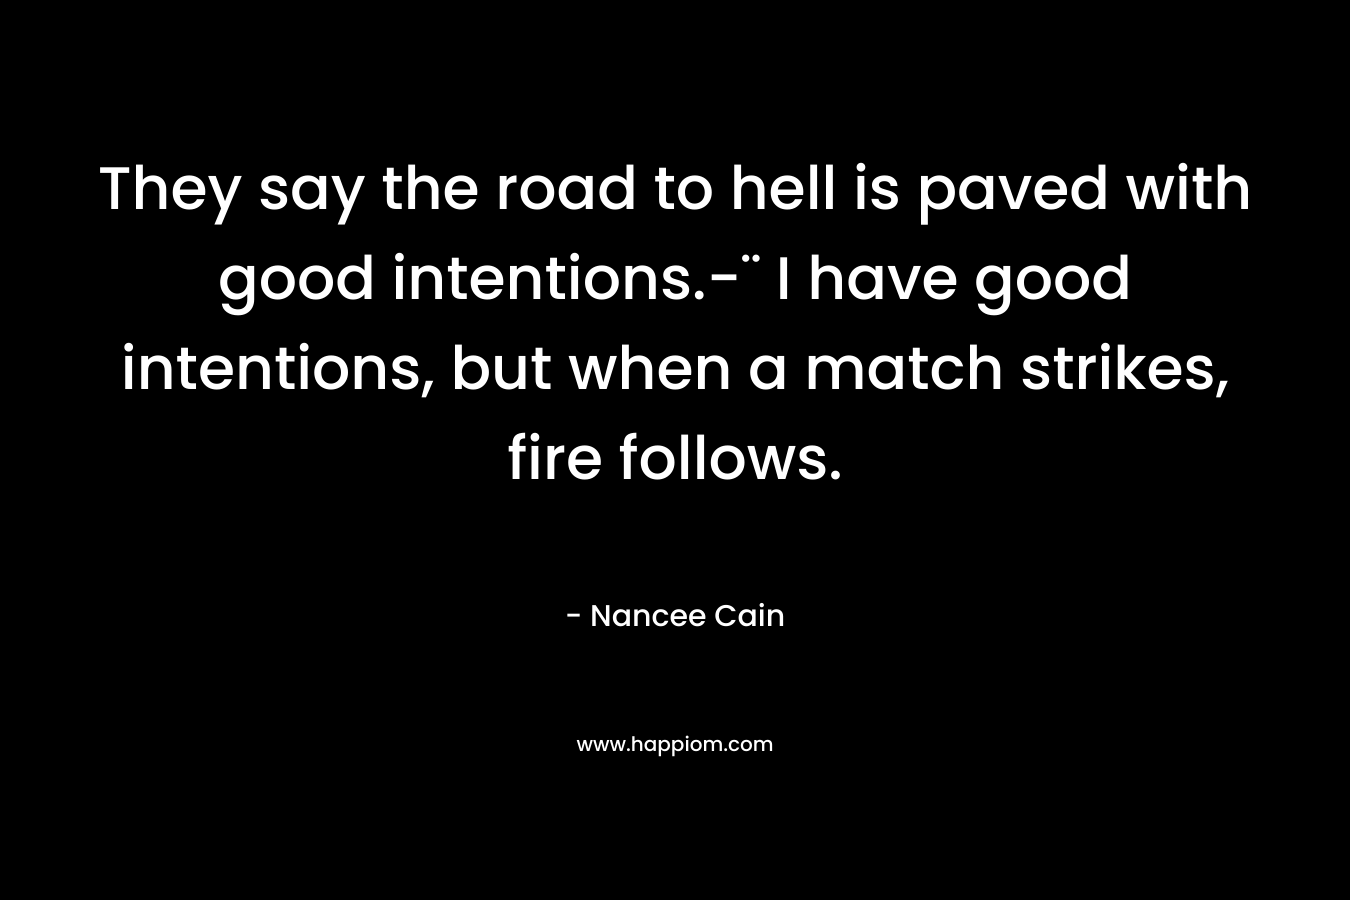 They say the road to hell is paved with good intentions.-¨ I have good intentions, but when a match strikes, fire follows.